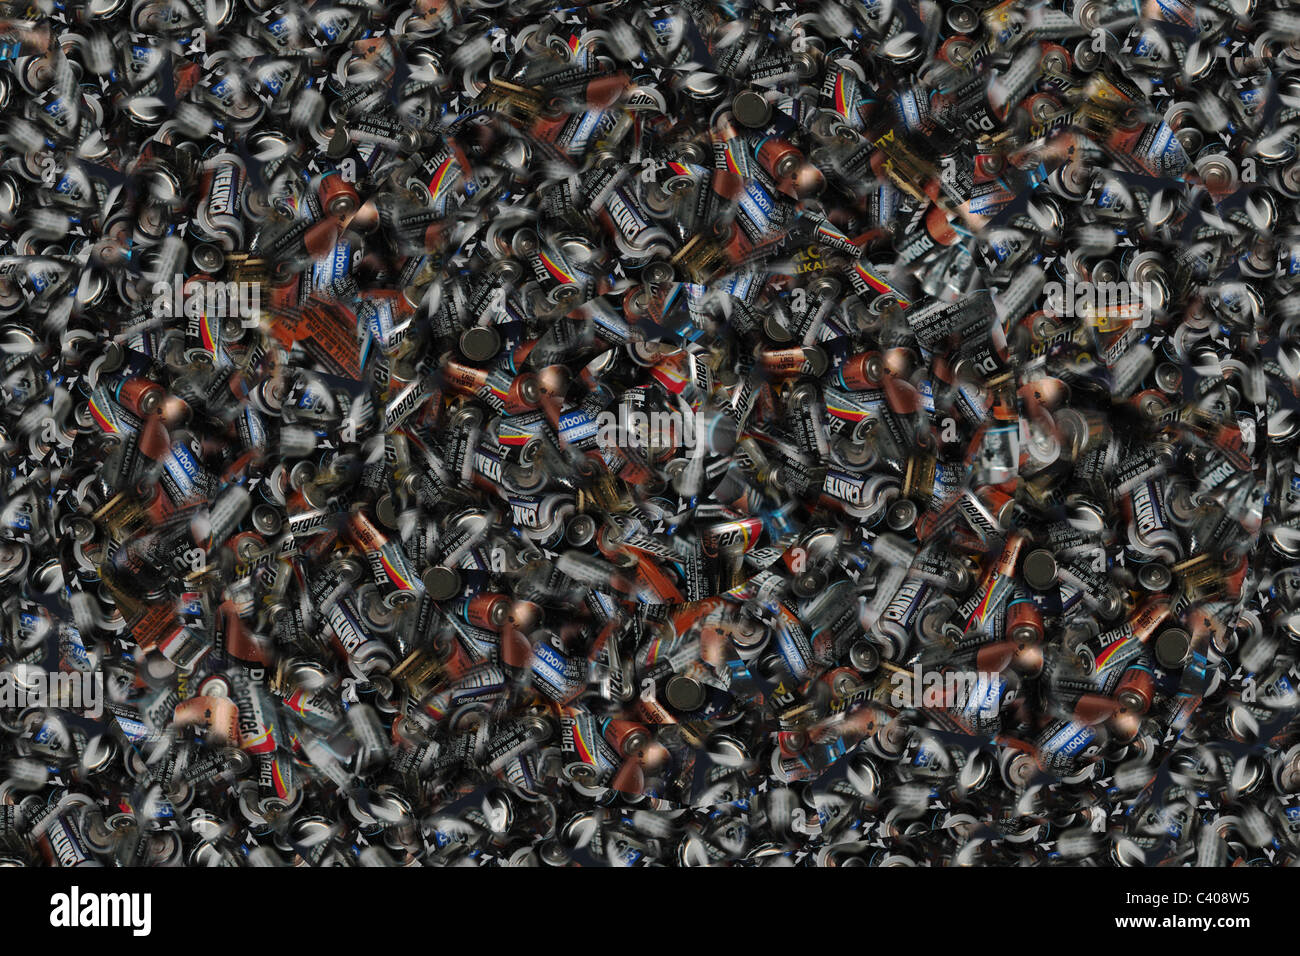 Dynamic vision of a large number of AA batteries, ready to be recycled Stock Photo